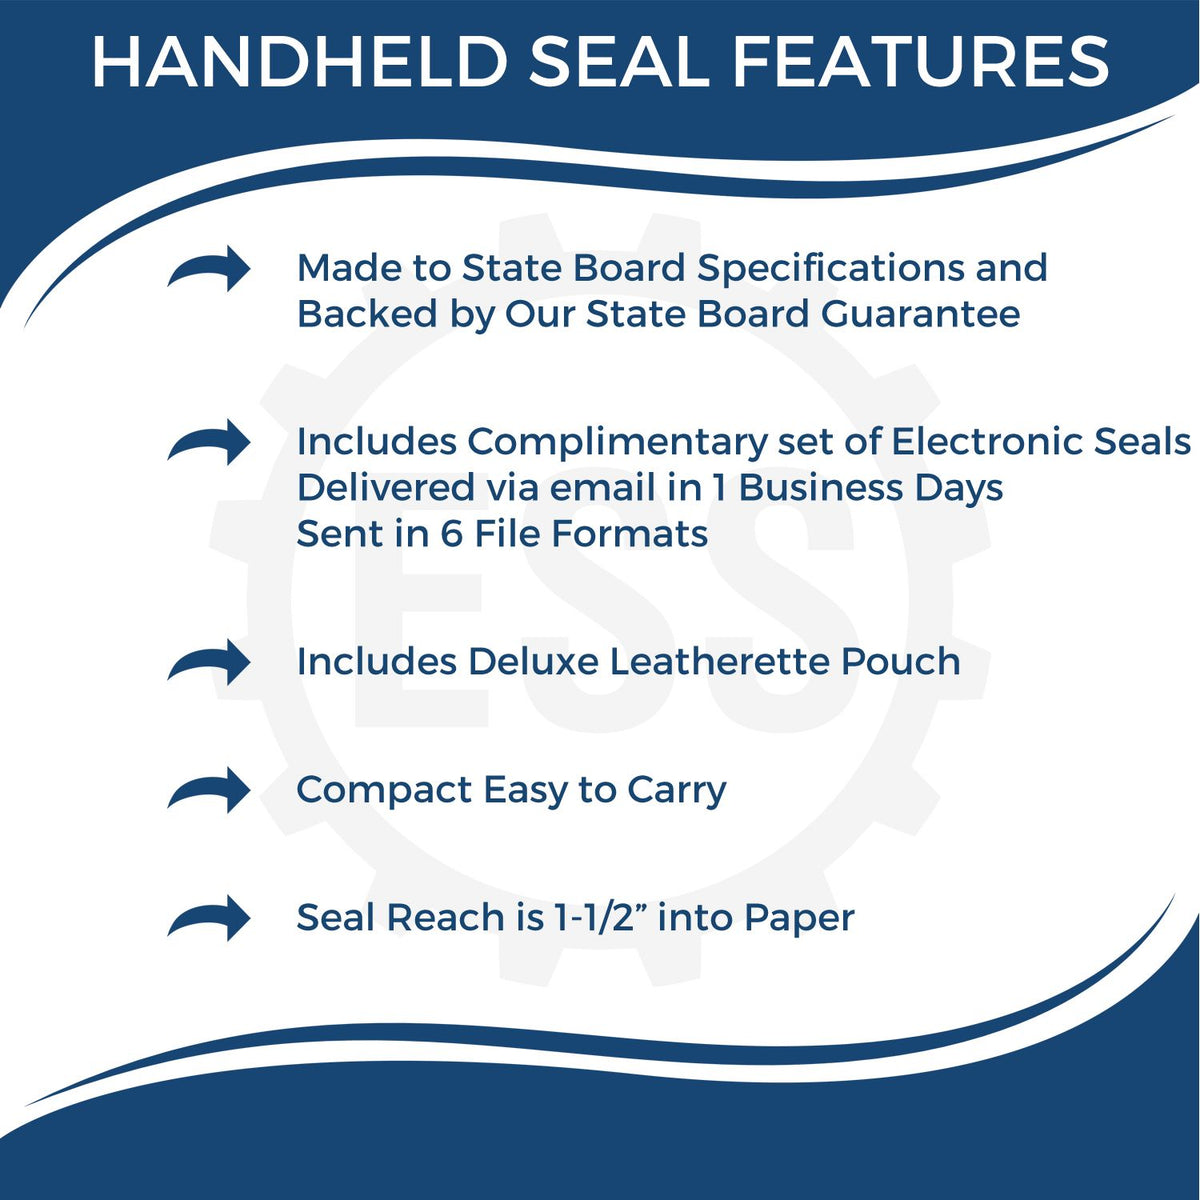 A picture of an infographic highlighting the selling points for the Handheld Nevada Land Surveyor Seal